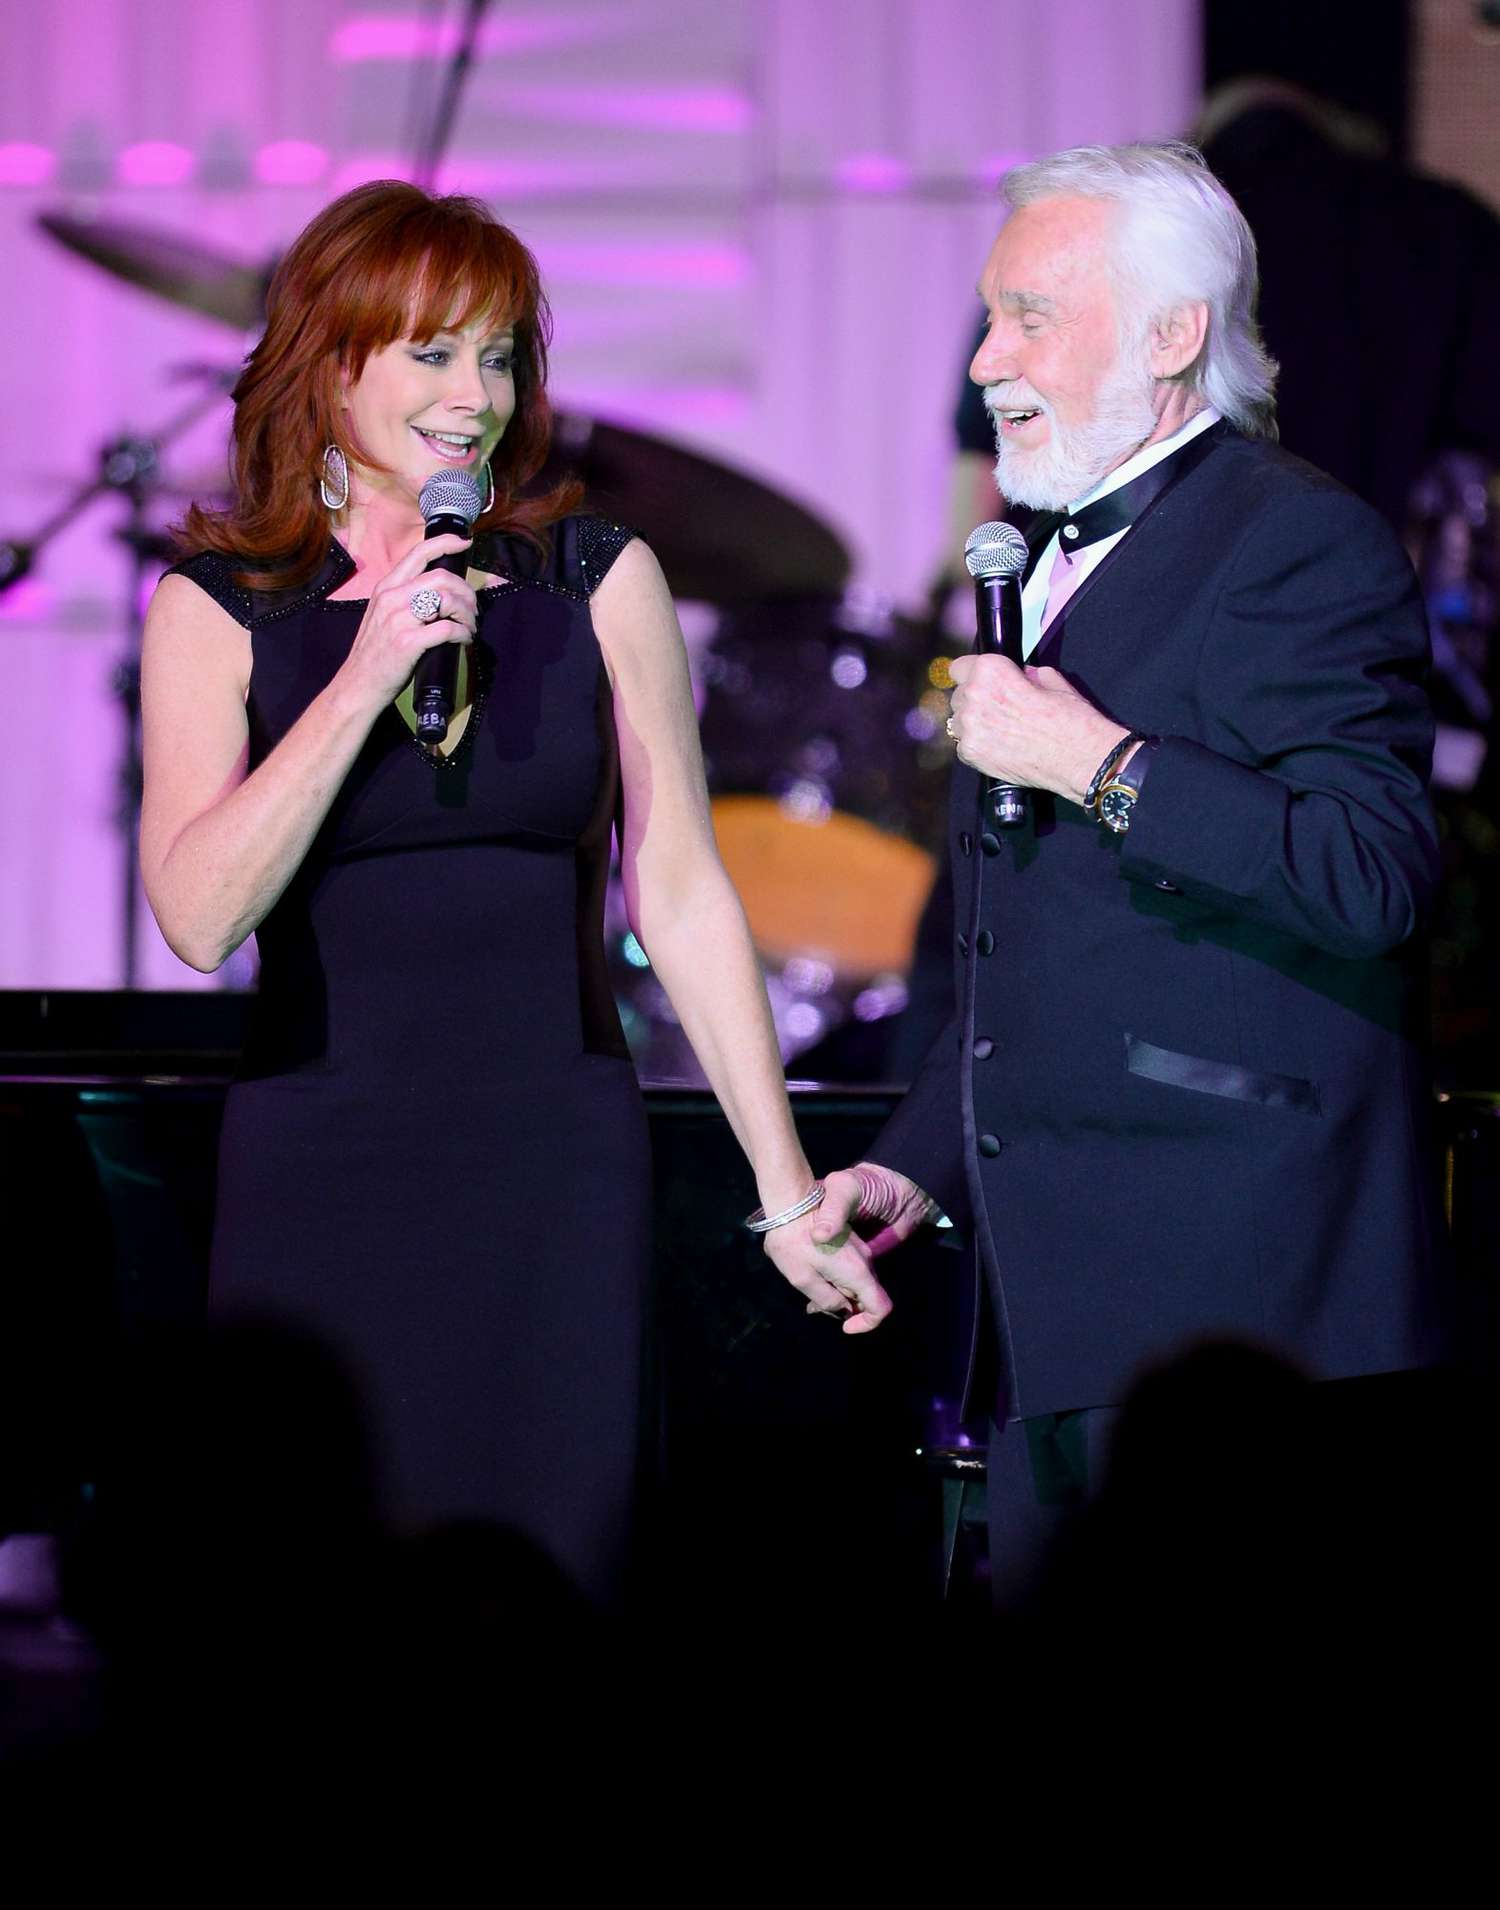 Reba McEntire Says Late Kenny Rogers 'Saved My Sanity' After Her Band's 1991 Fatal Plane Crash'Saved My Sanity' After Her Band's 1991 Fatal Plane Crash